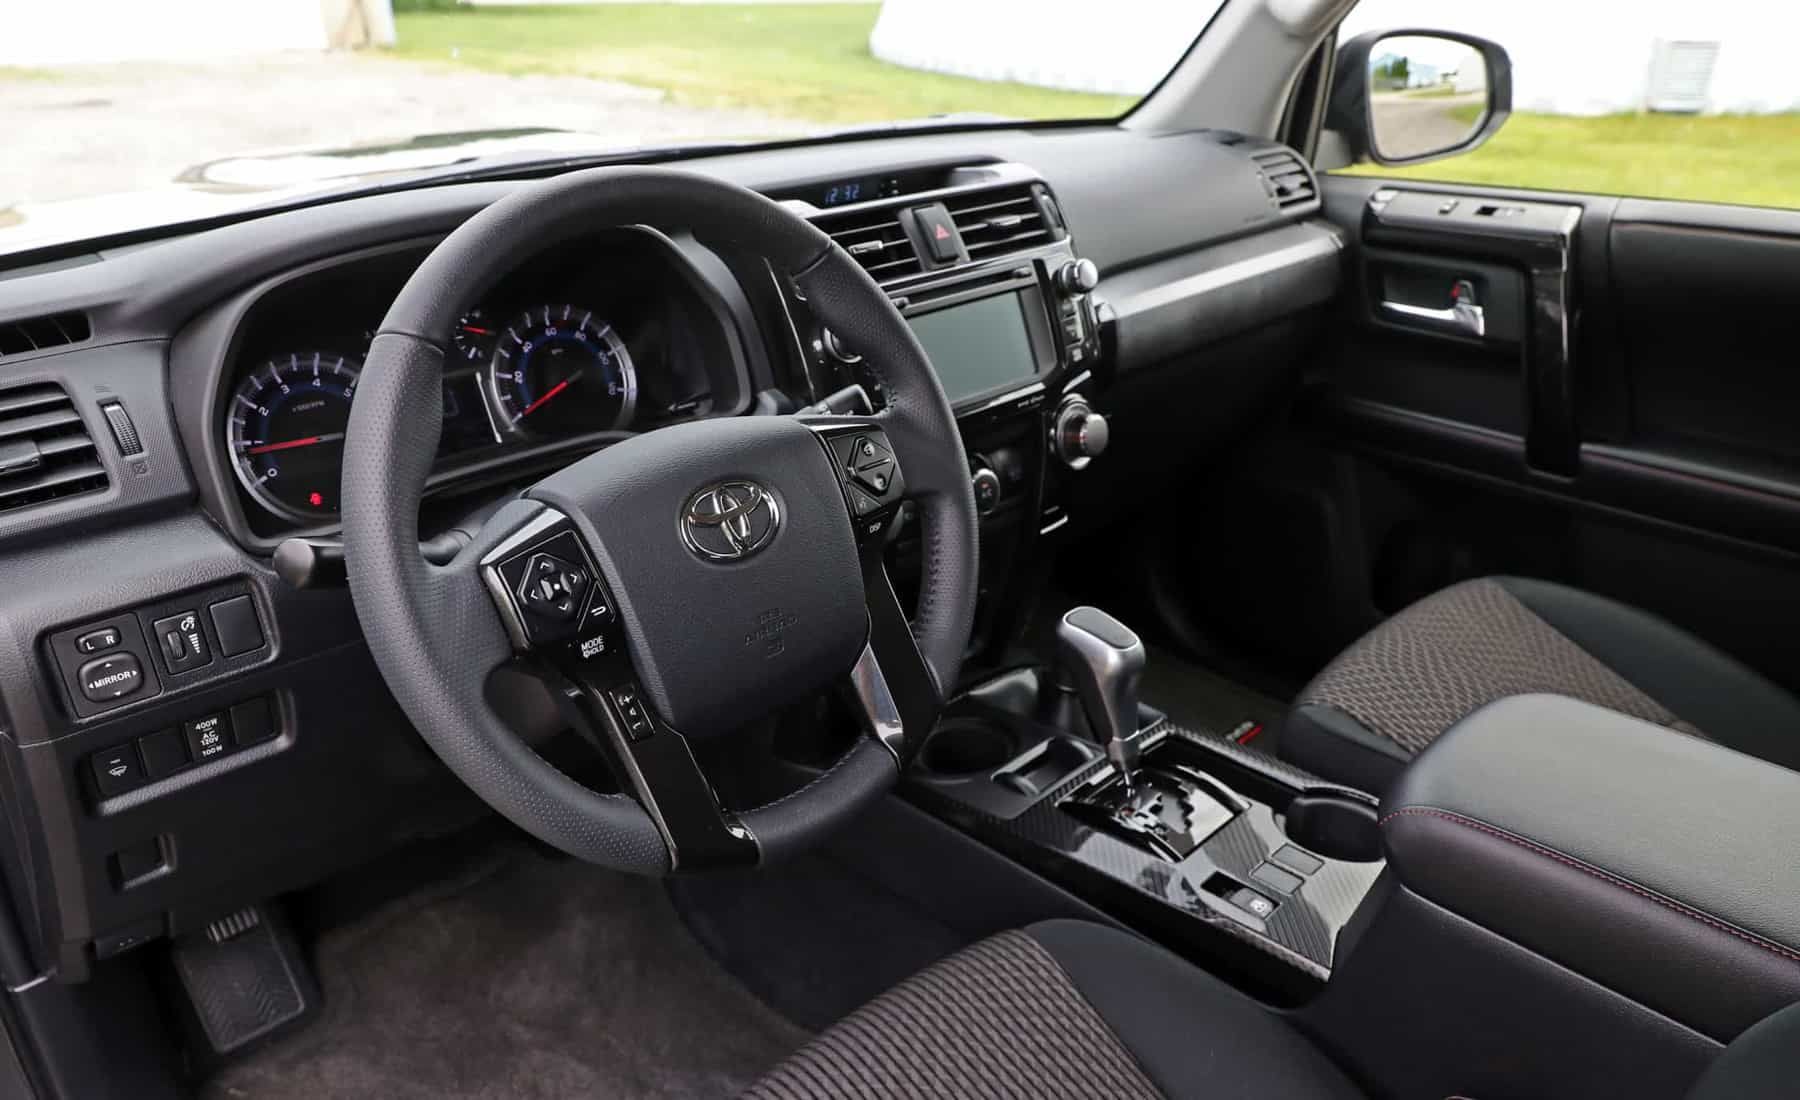 2017 Toyota 4runner Trd Off Road 4wd Interior Driver Cockpit (View 26 of 40)